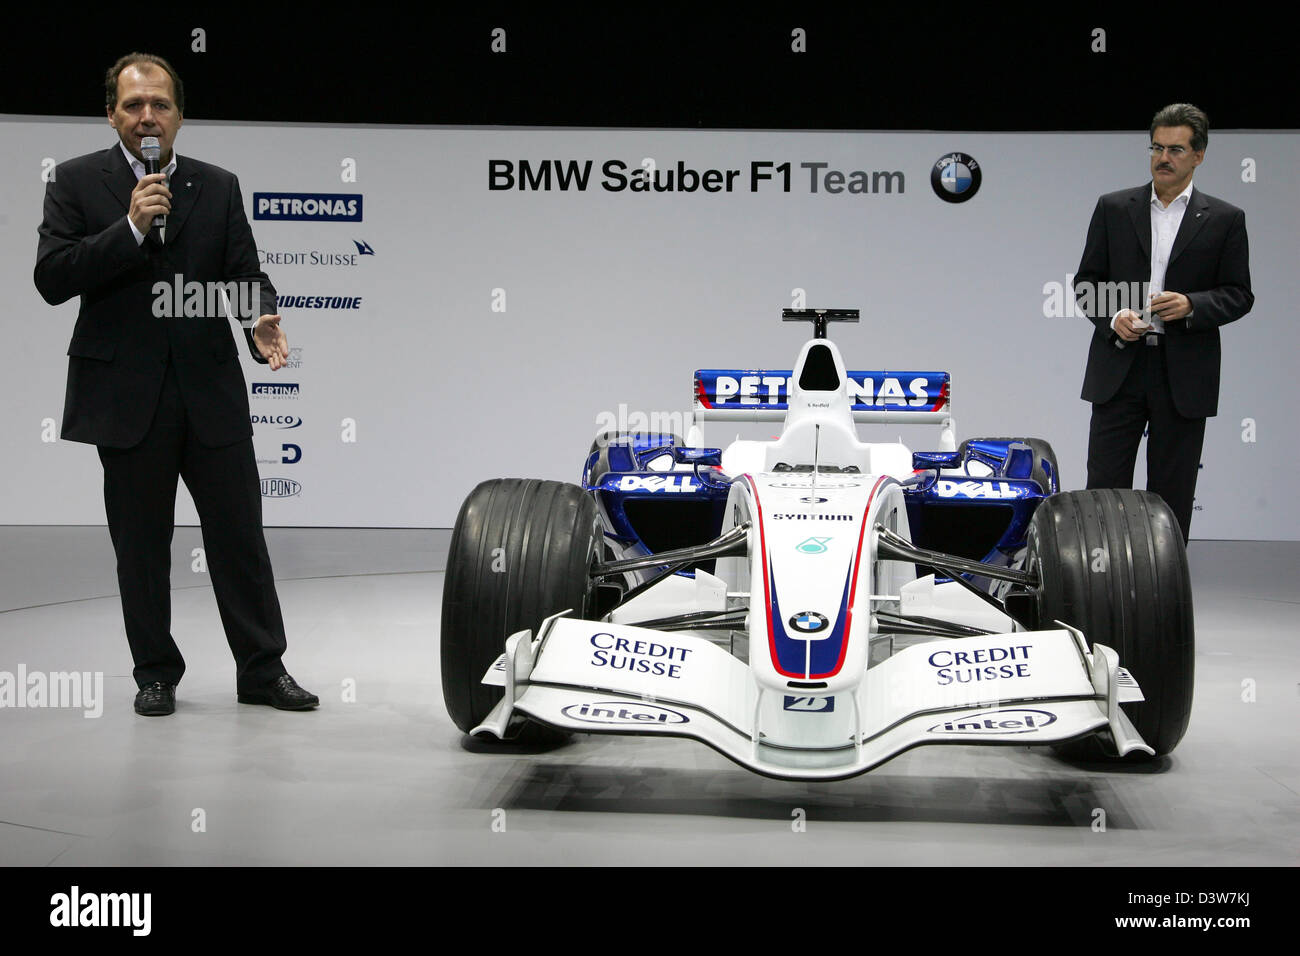 BMW Sauber F1 technical director Willy Rampf (L) and motorsport director  Mario Theissen (R) pictured at the presentation of the new BMW Sauber 'F1.07'  in Valencia, Spain, Tuesday, 16 January 2007. Photo: